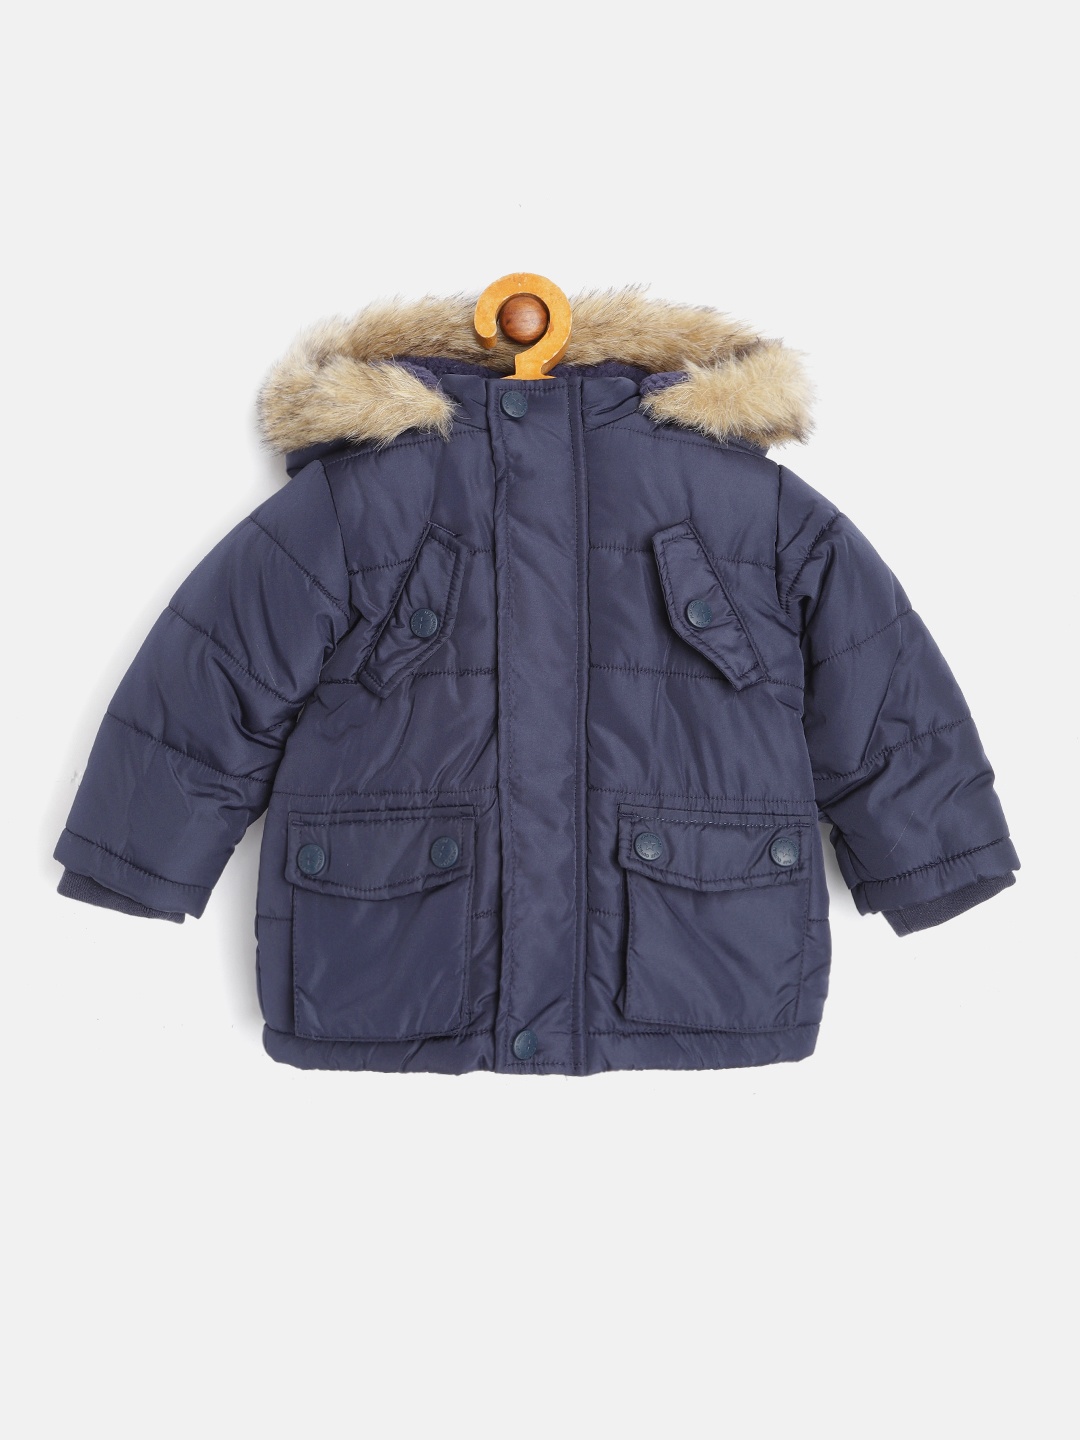 

mothercare Boys Navy Blue Solid Hooded Parka Jacket